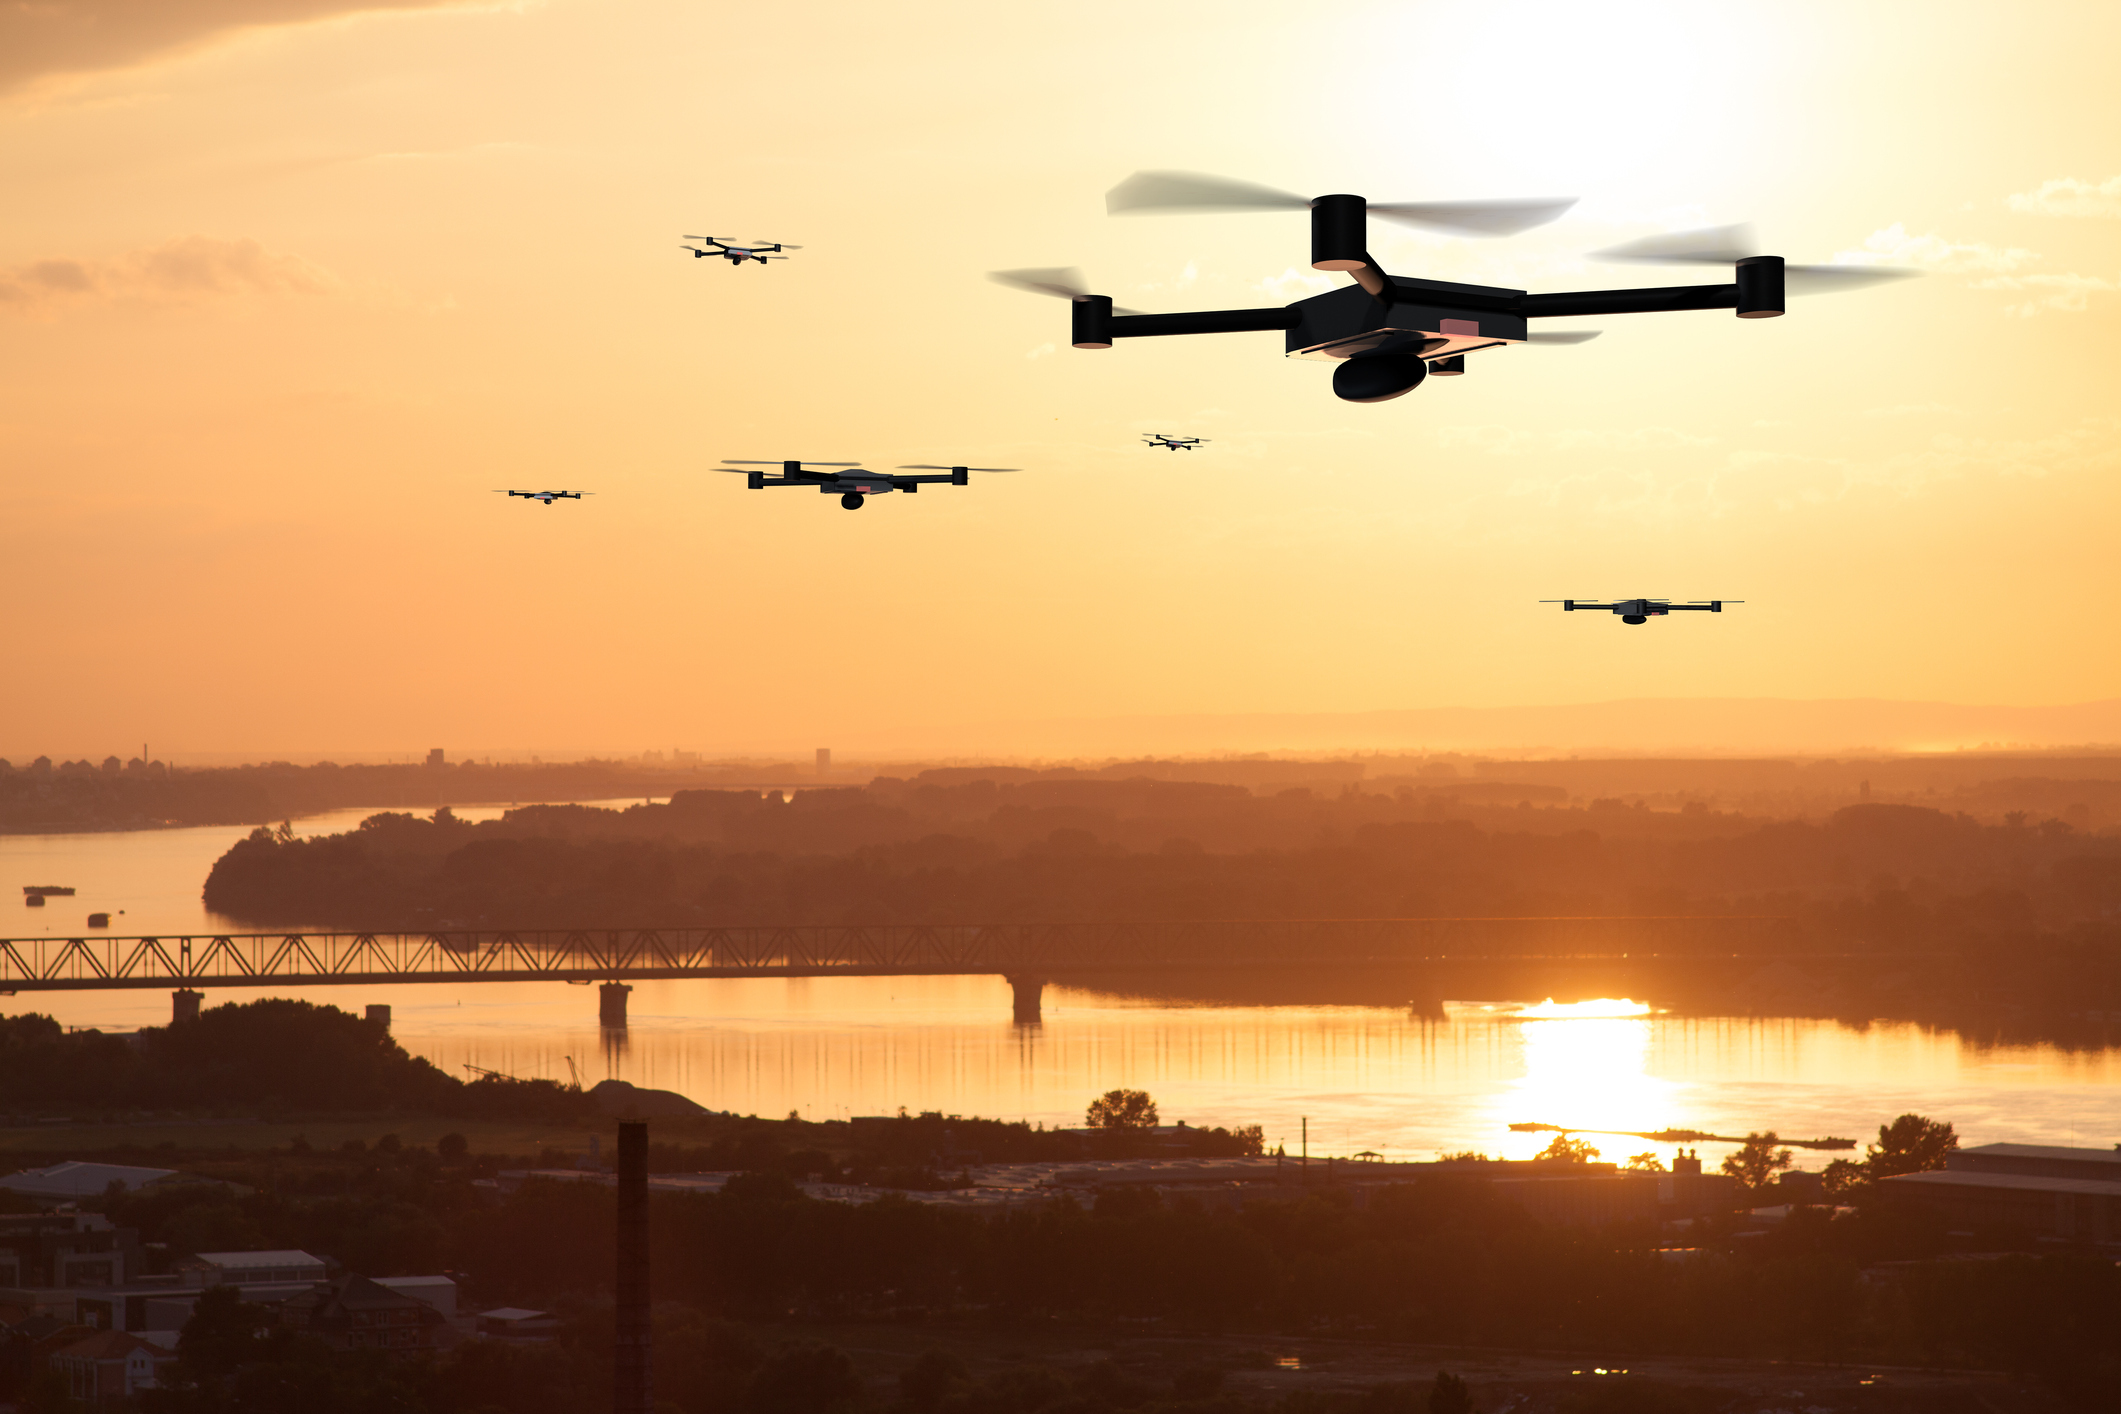 GTRI researchers are helping UAVS navigate without access to GPS